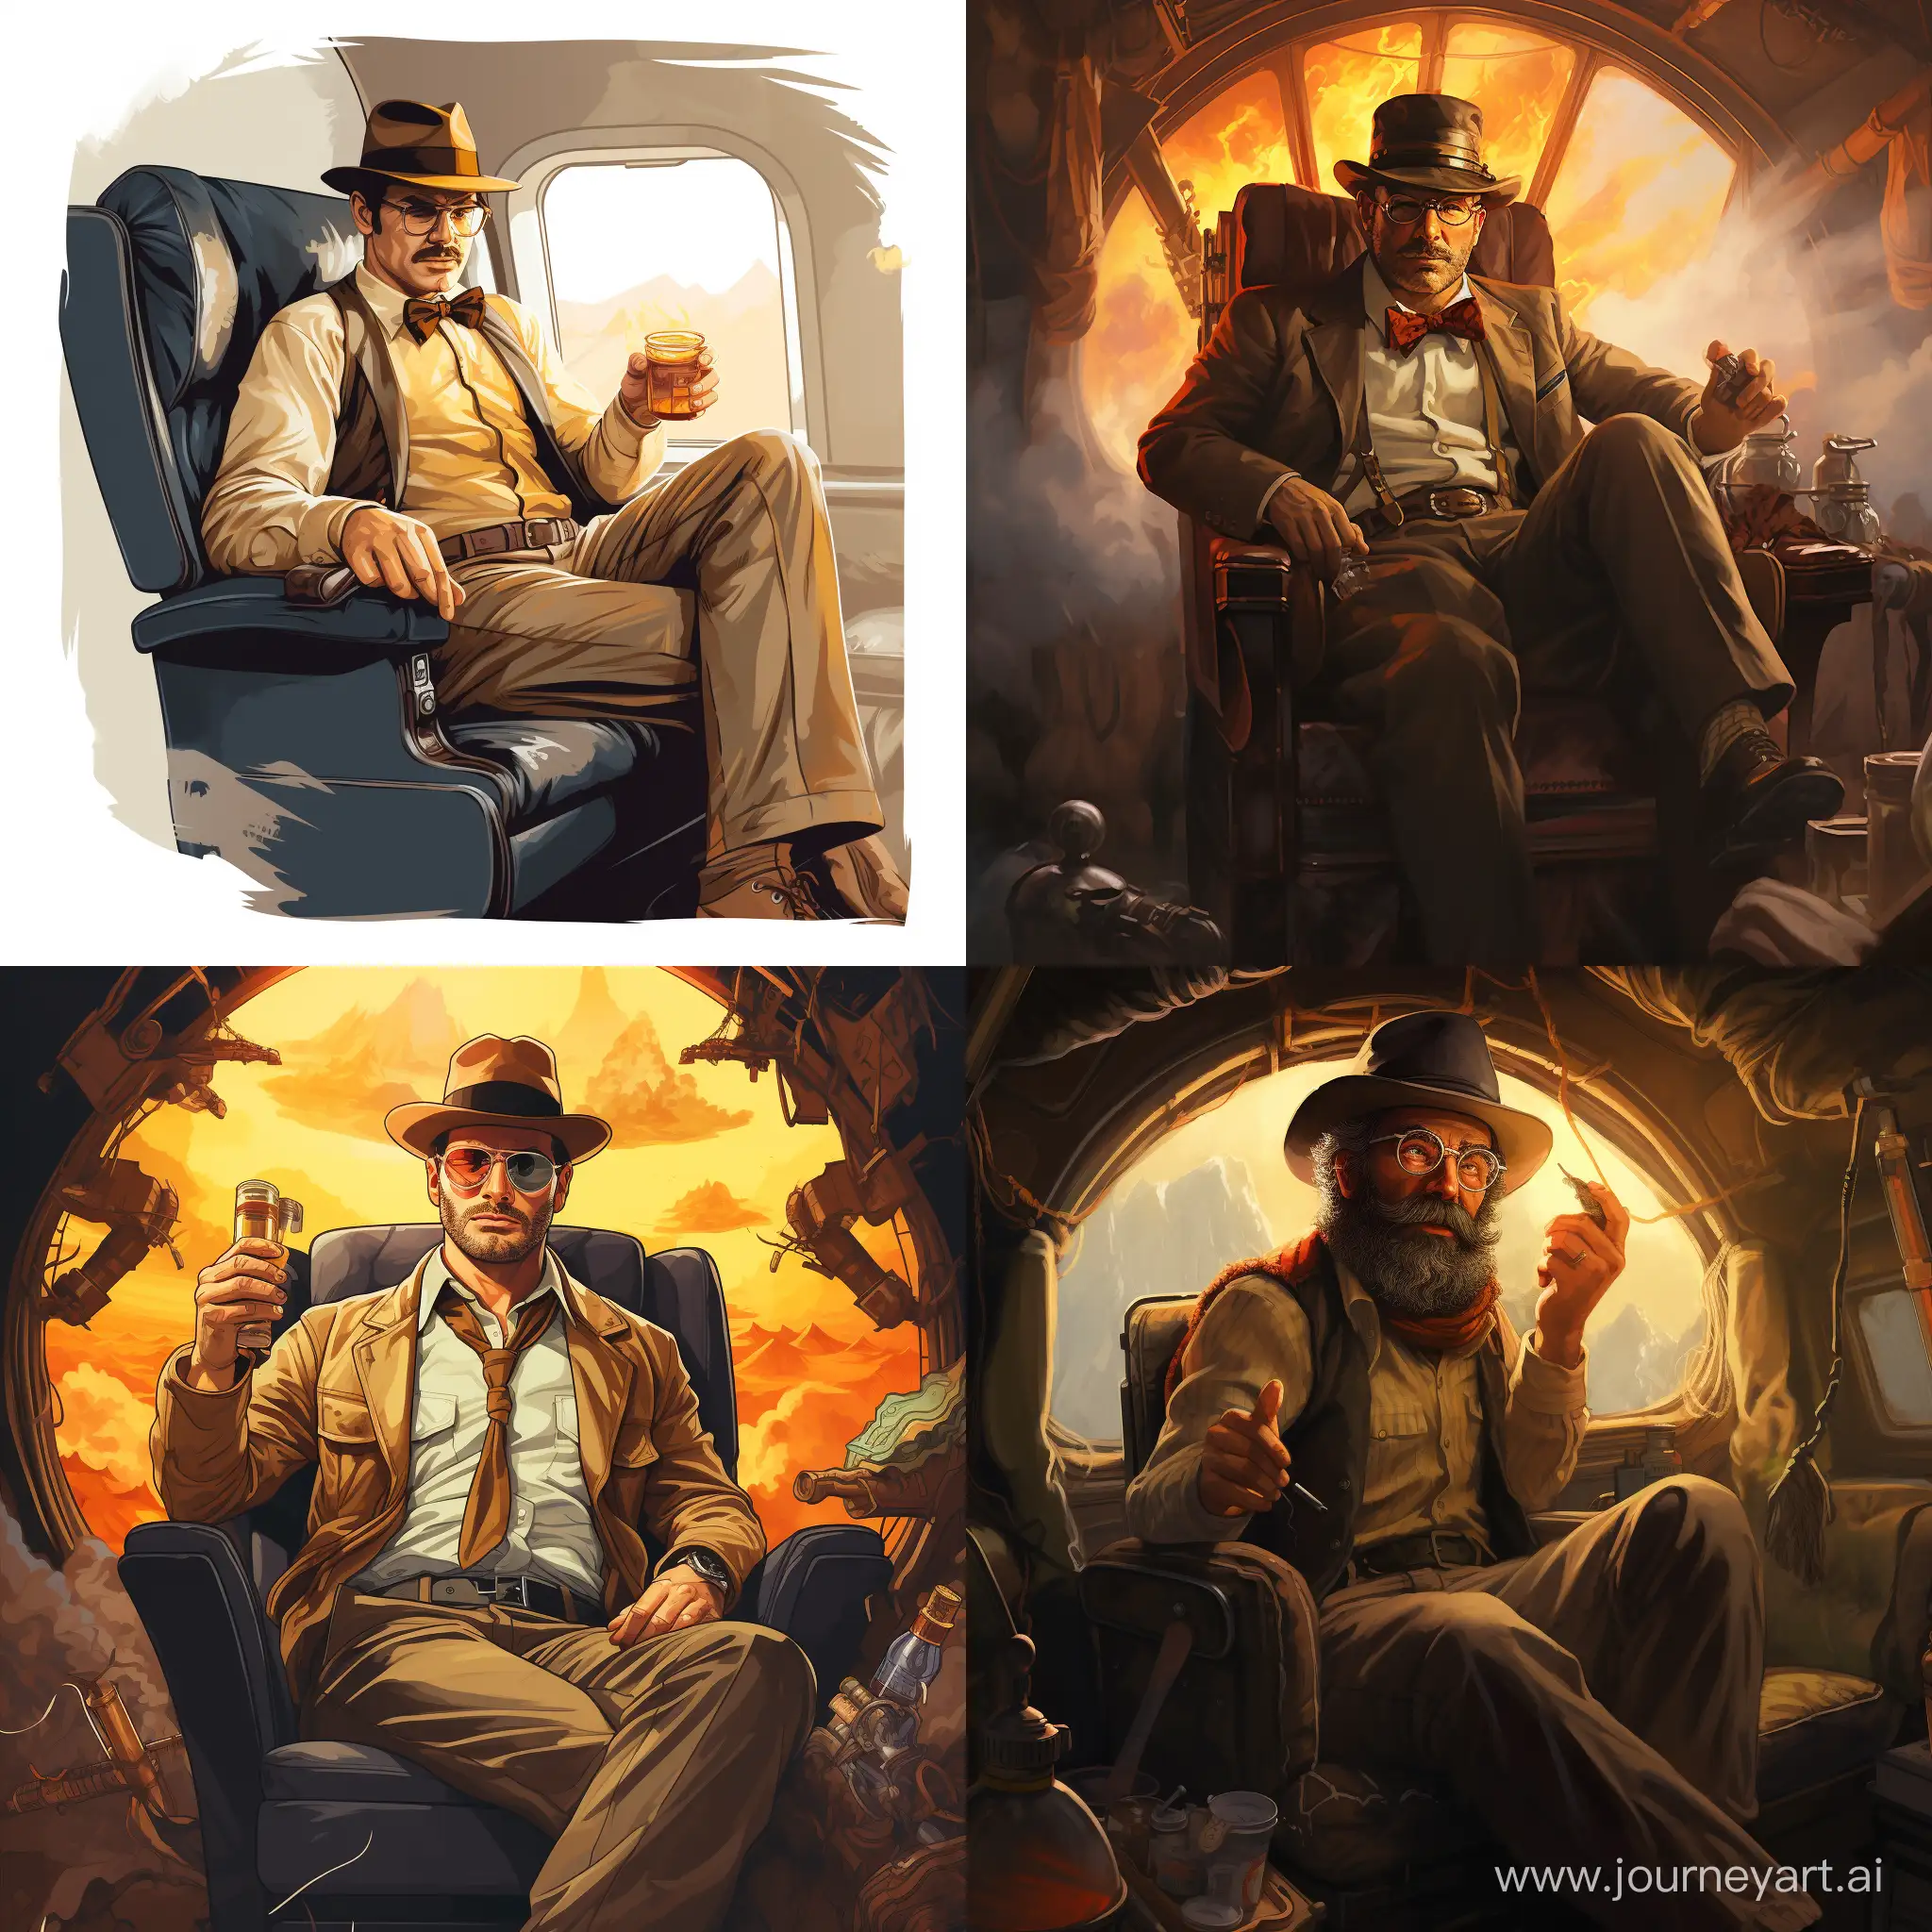 indiana jones sitting in a plane, smoking a tobacco pipe